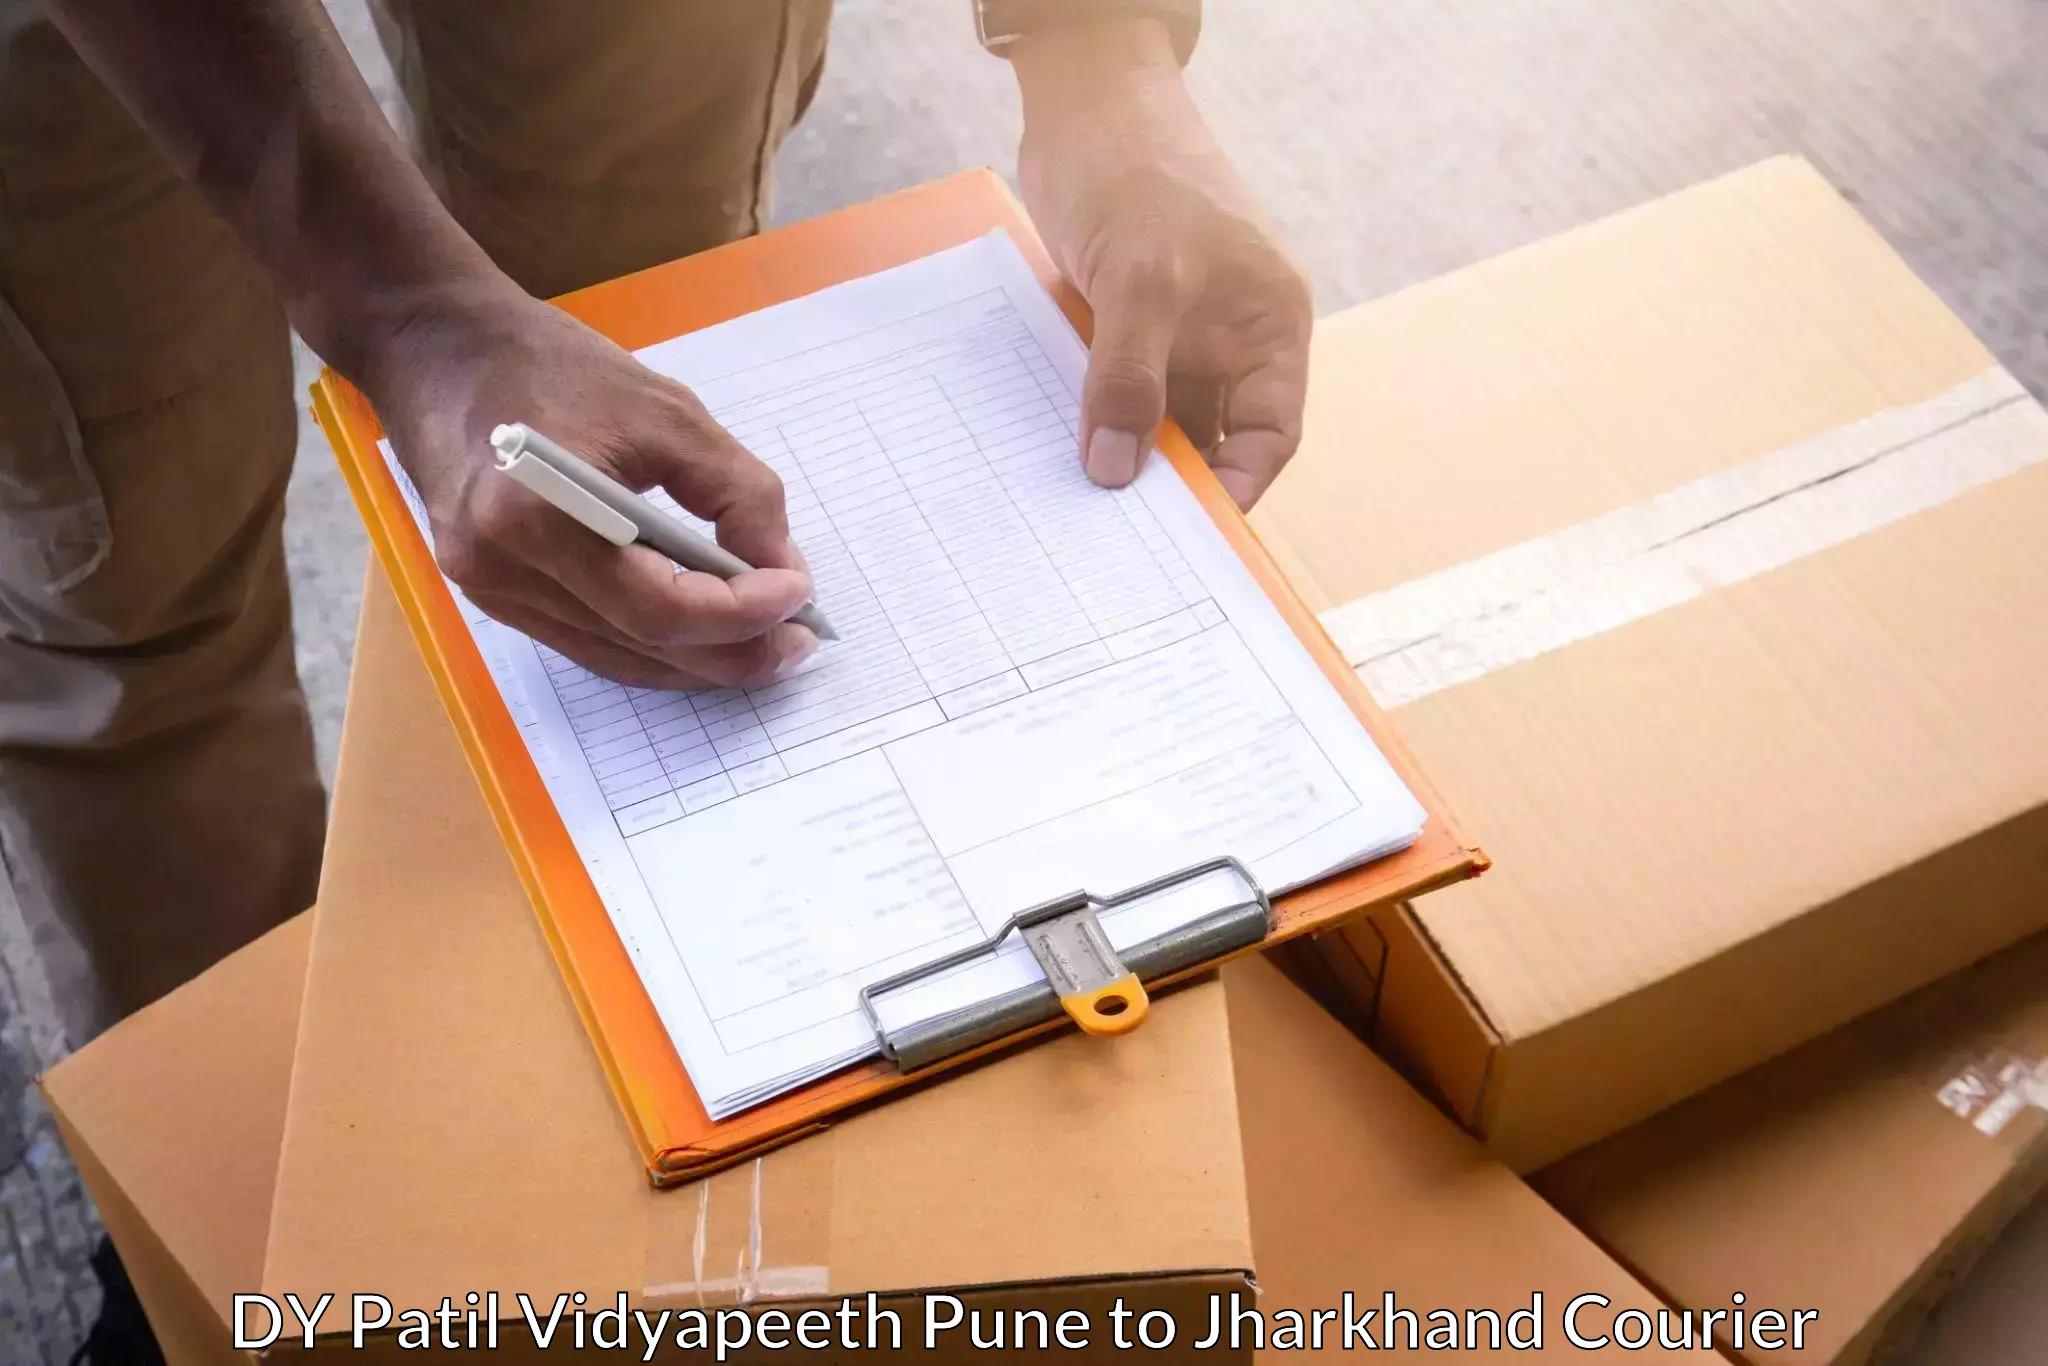 Express mail solutions DY Patil Vidyapeeth Pune to Jharkhand